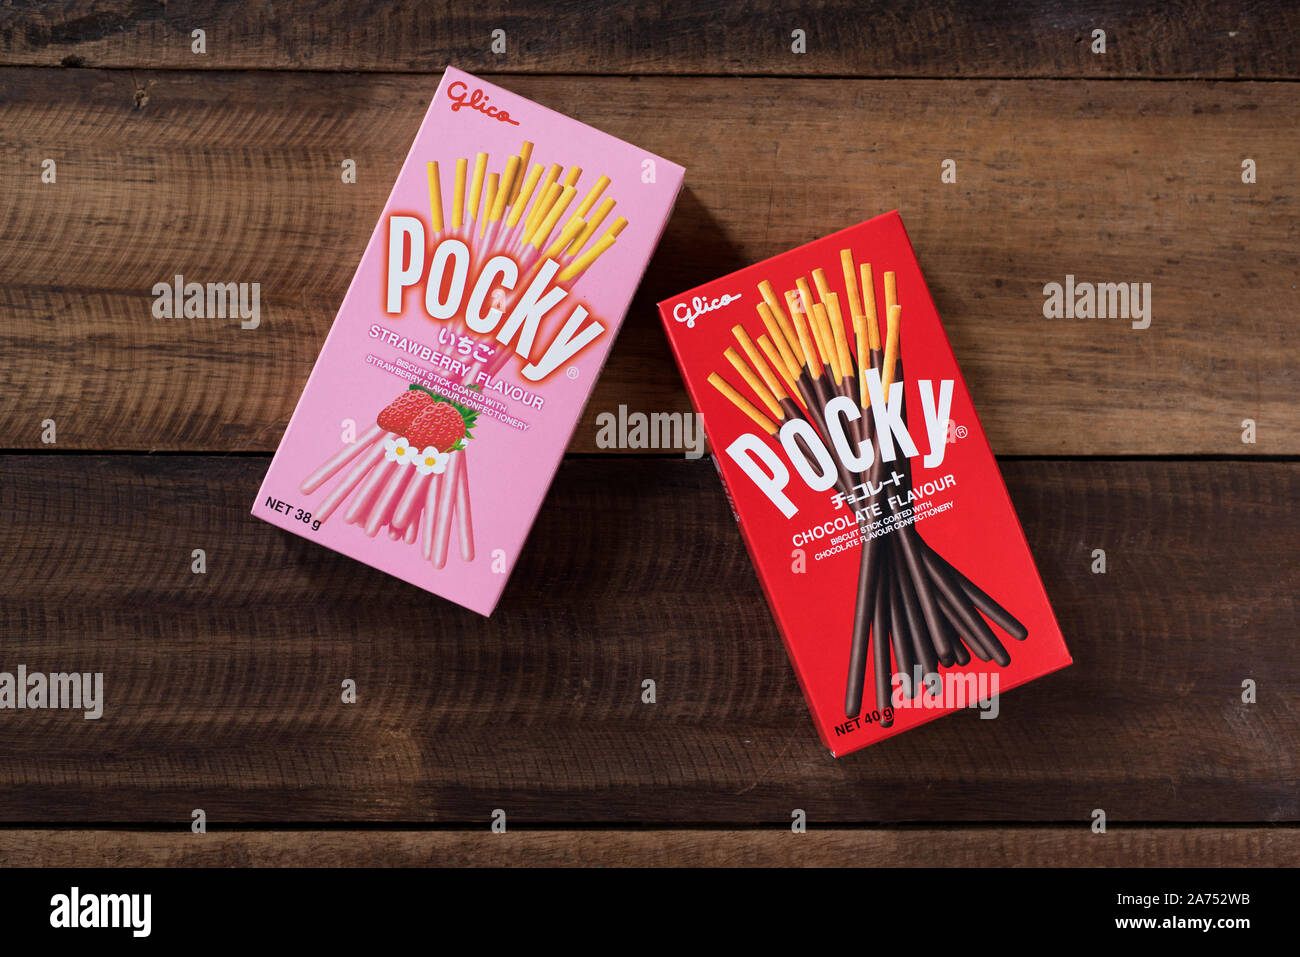 Petaling jaya, Selangor, Malaysia - 20 Oktober 2019 : Pocky brand of chocolate sticks on wooden background. Pocky is a famous confectionery among asia Stock Photo